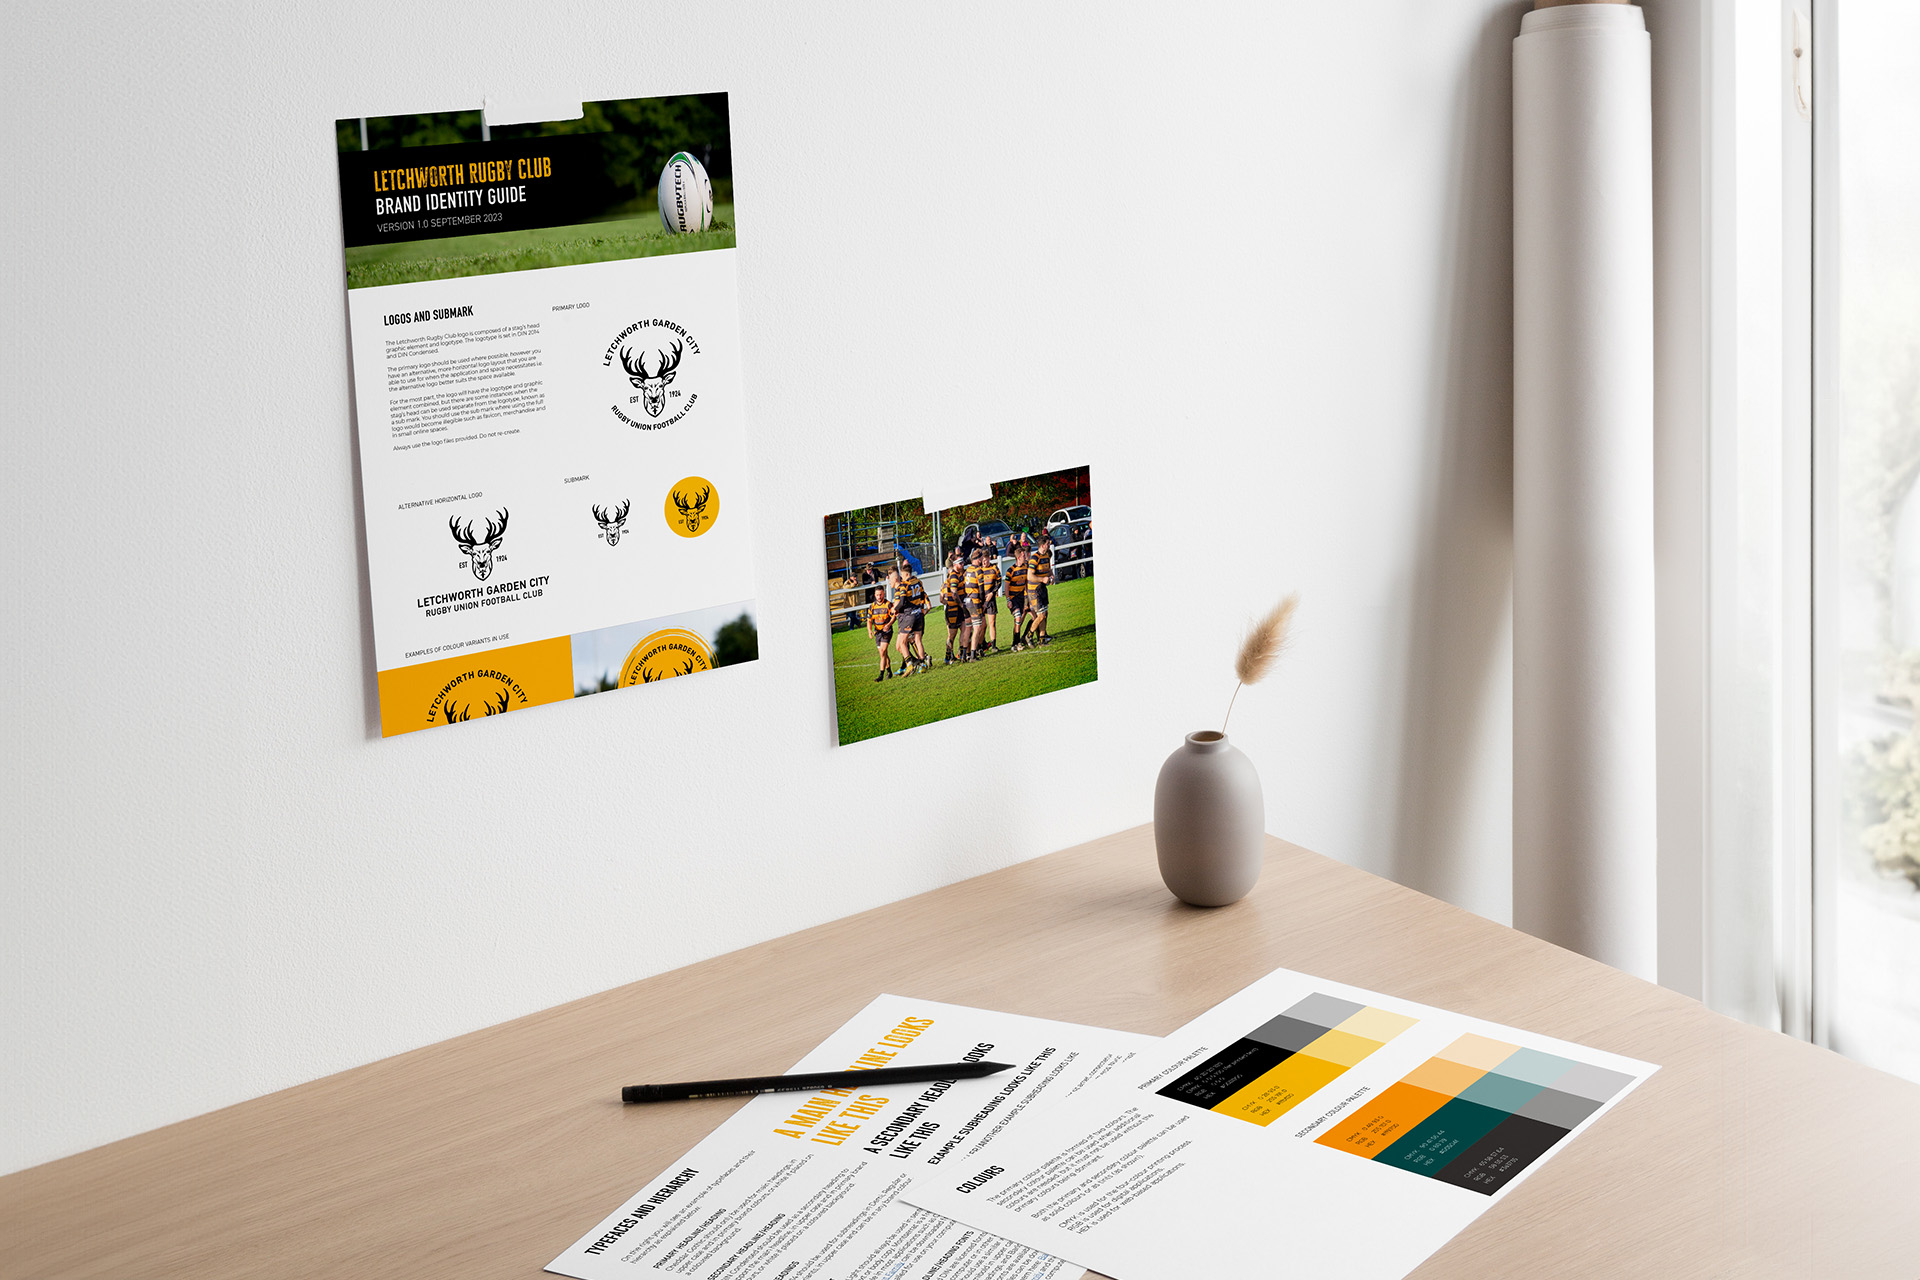 Letchworth Rugby Club Brand and Marketing strategy - brand guidelines on table